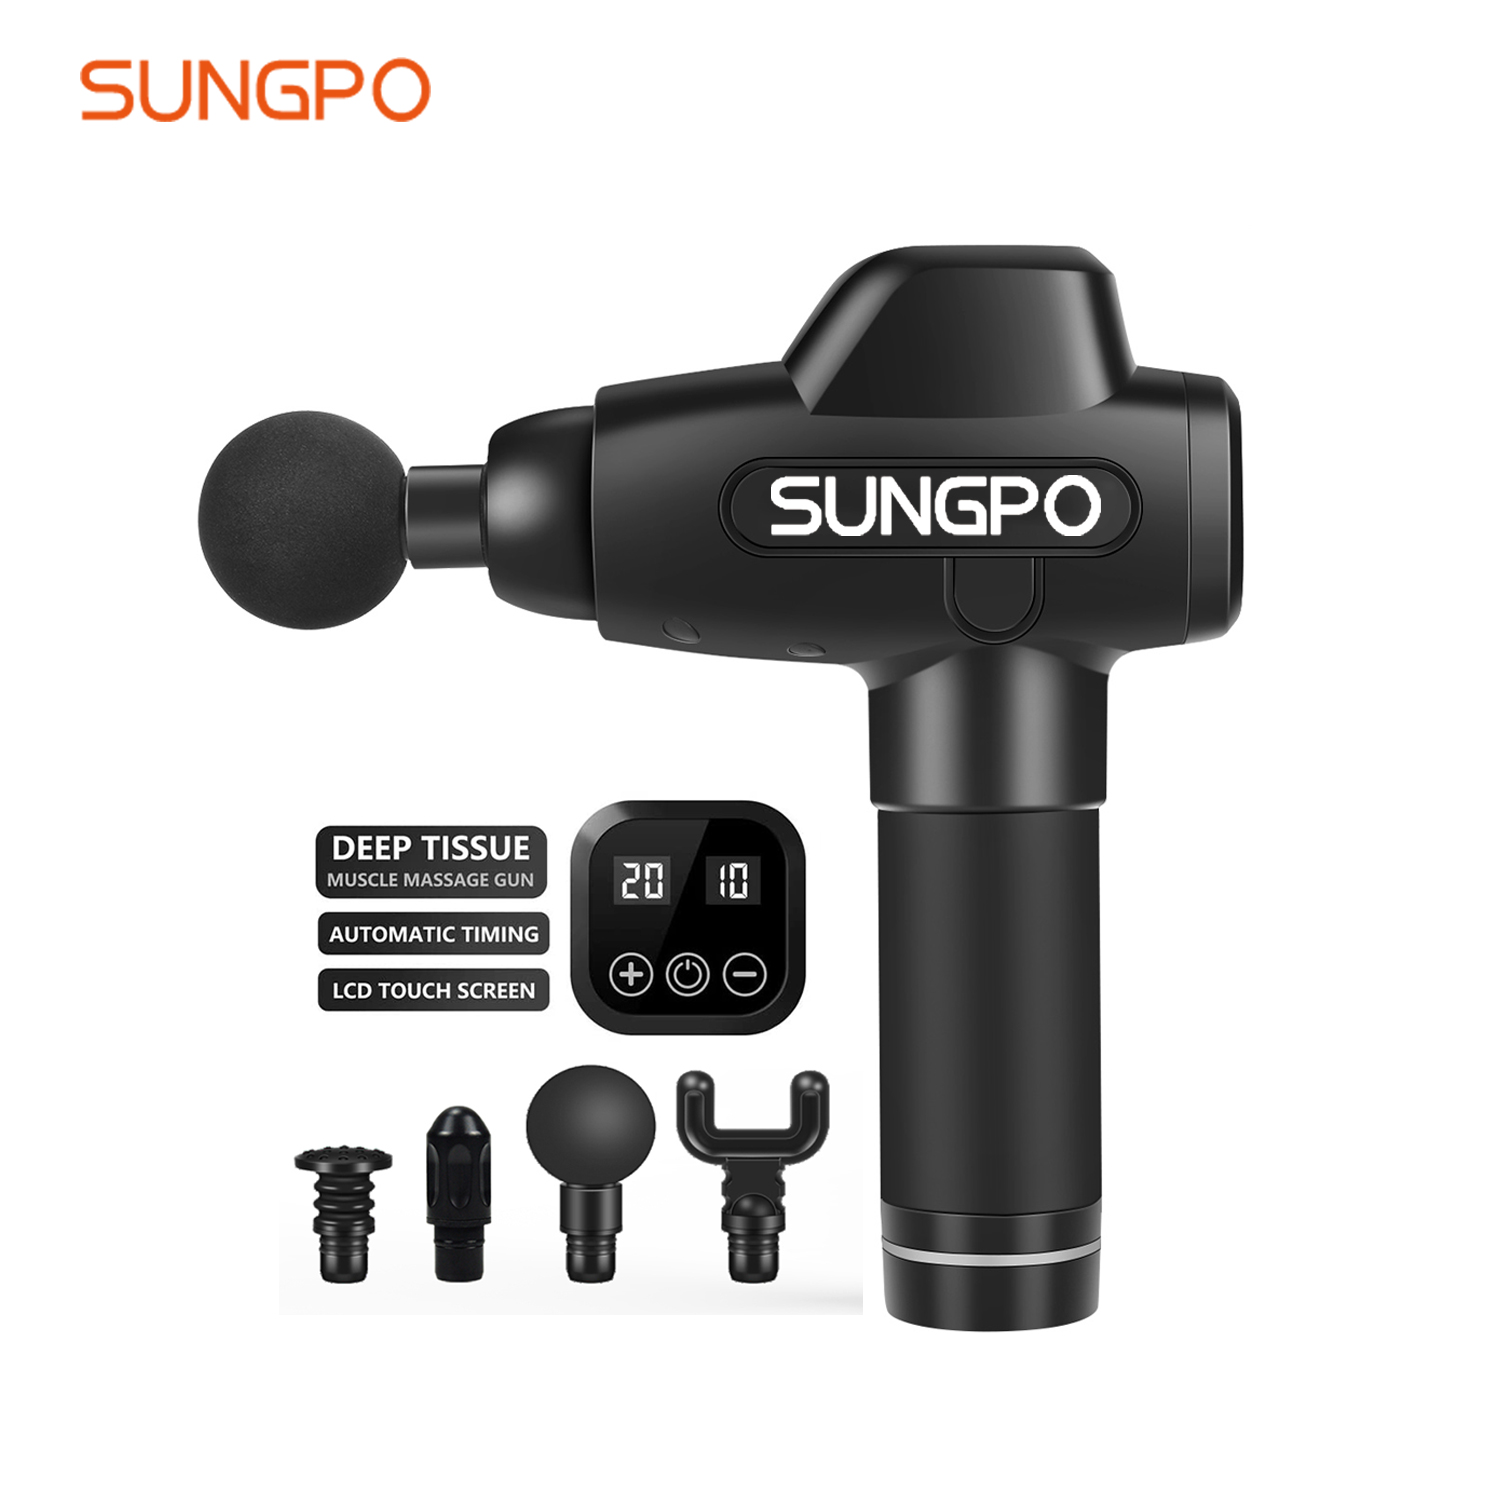 SUNGPO popular power massagers supplier for relax-2